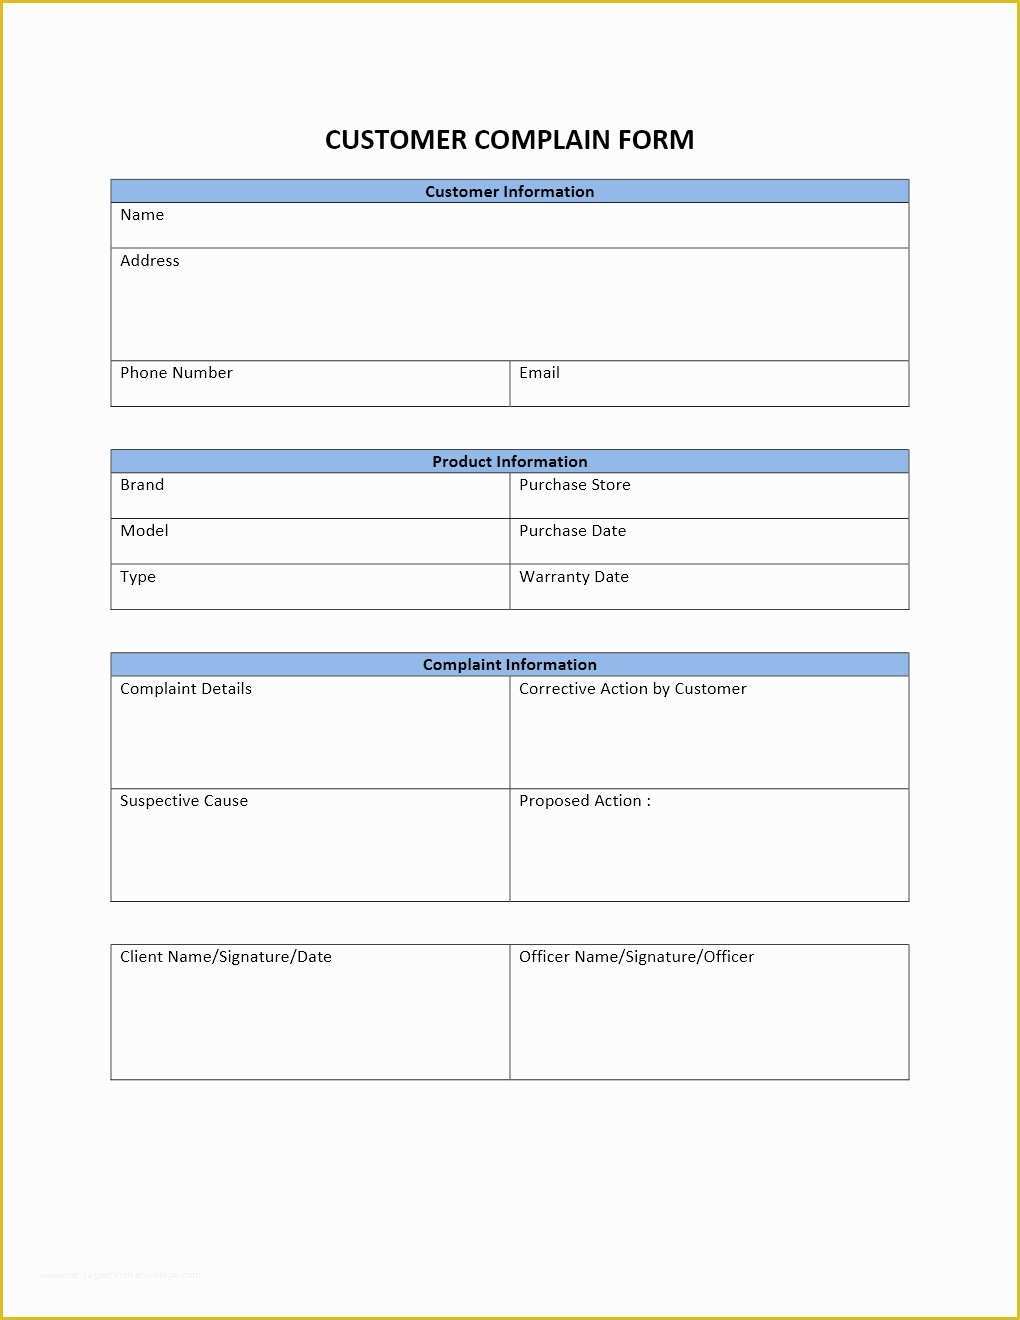 Customer Service Email Templates Free Of Customer Plaint form